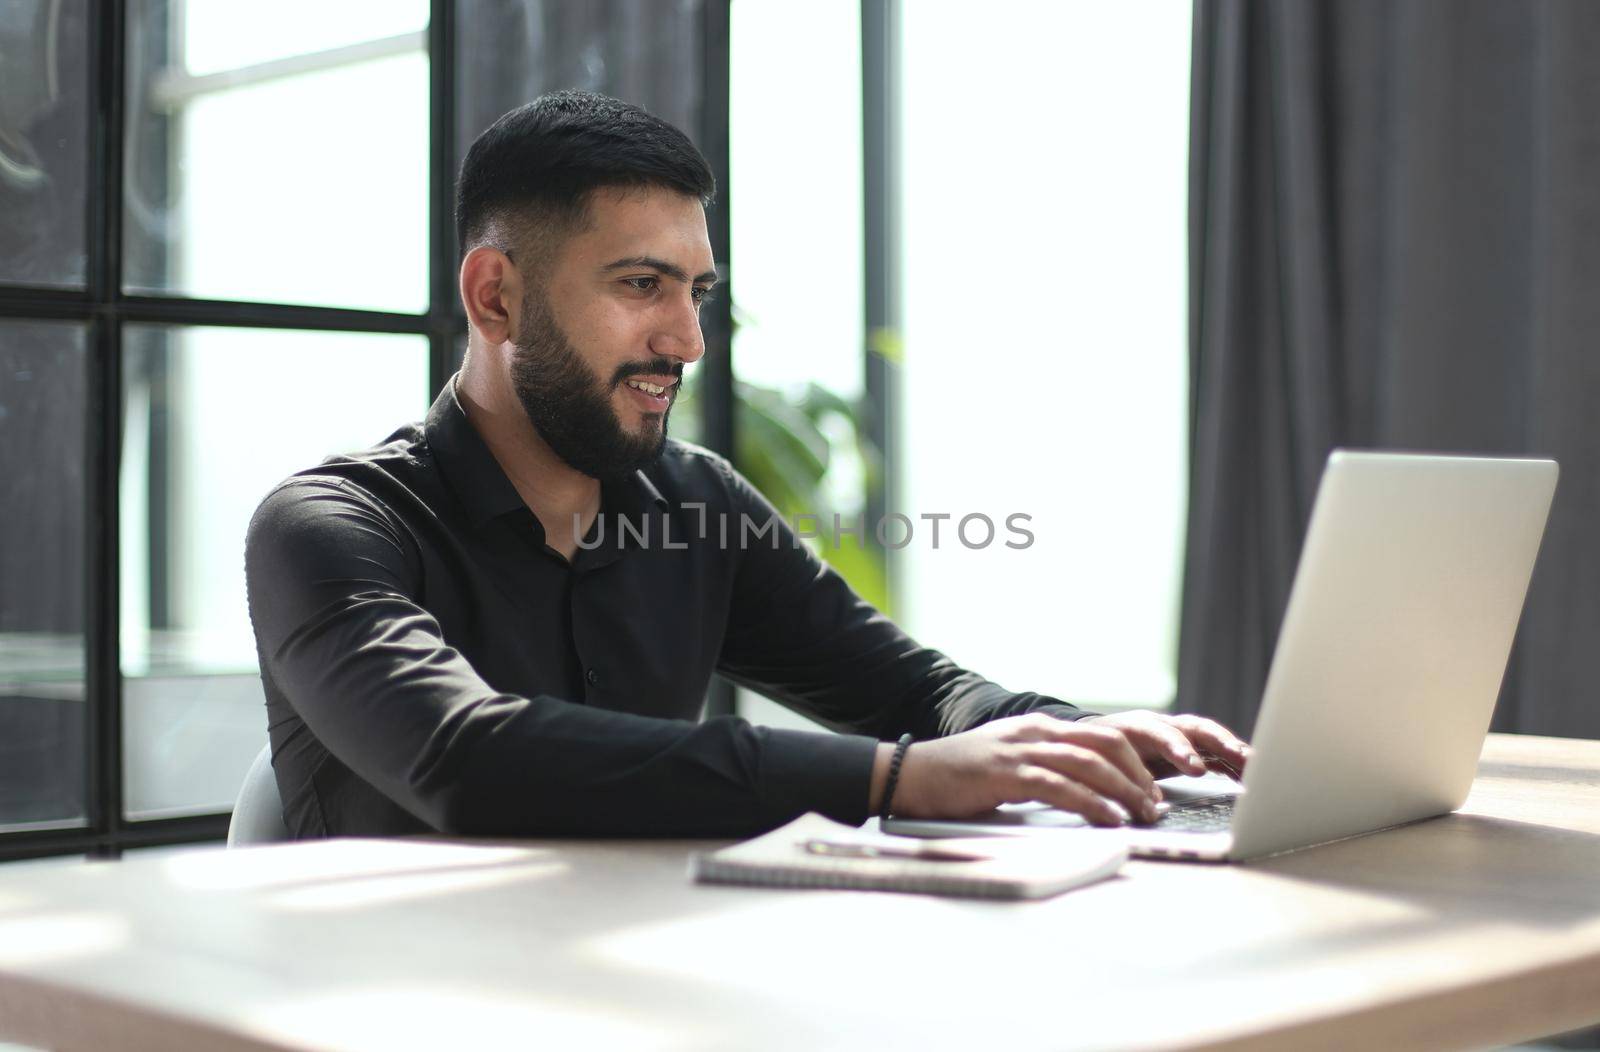 Focused young man wearing using laptop on keyboard, writing email or message by Prosto